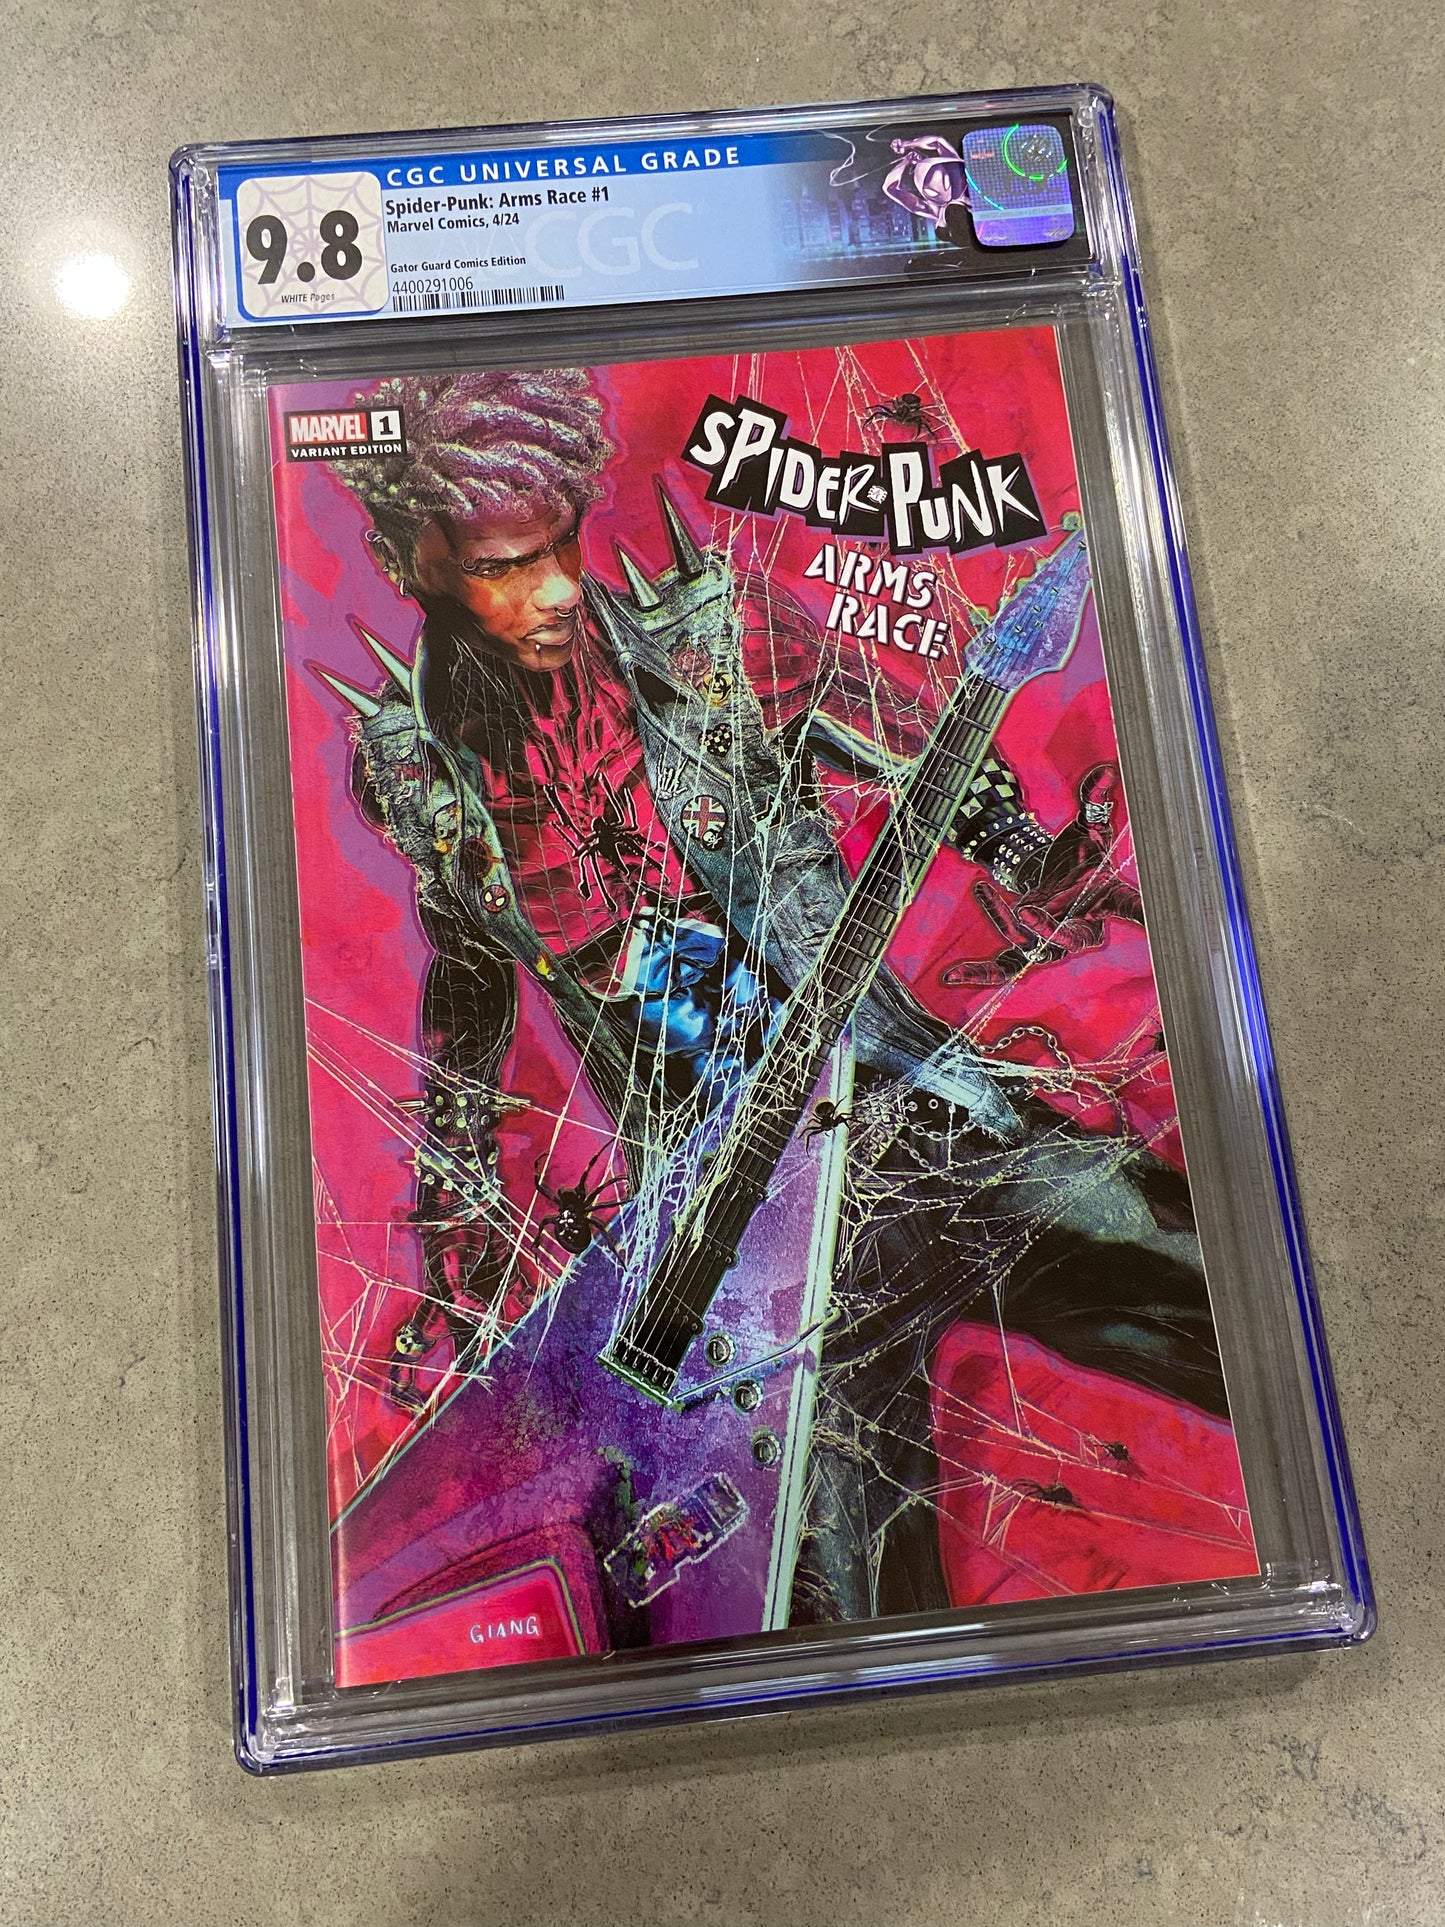 9.8 CGC Graded Spider-Punk Arm's Race #1 GATORGUARD Exclusive Variant Comic Book- JOHN GIANG- Trade Dress